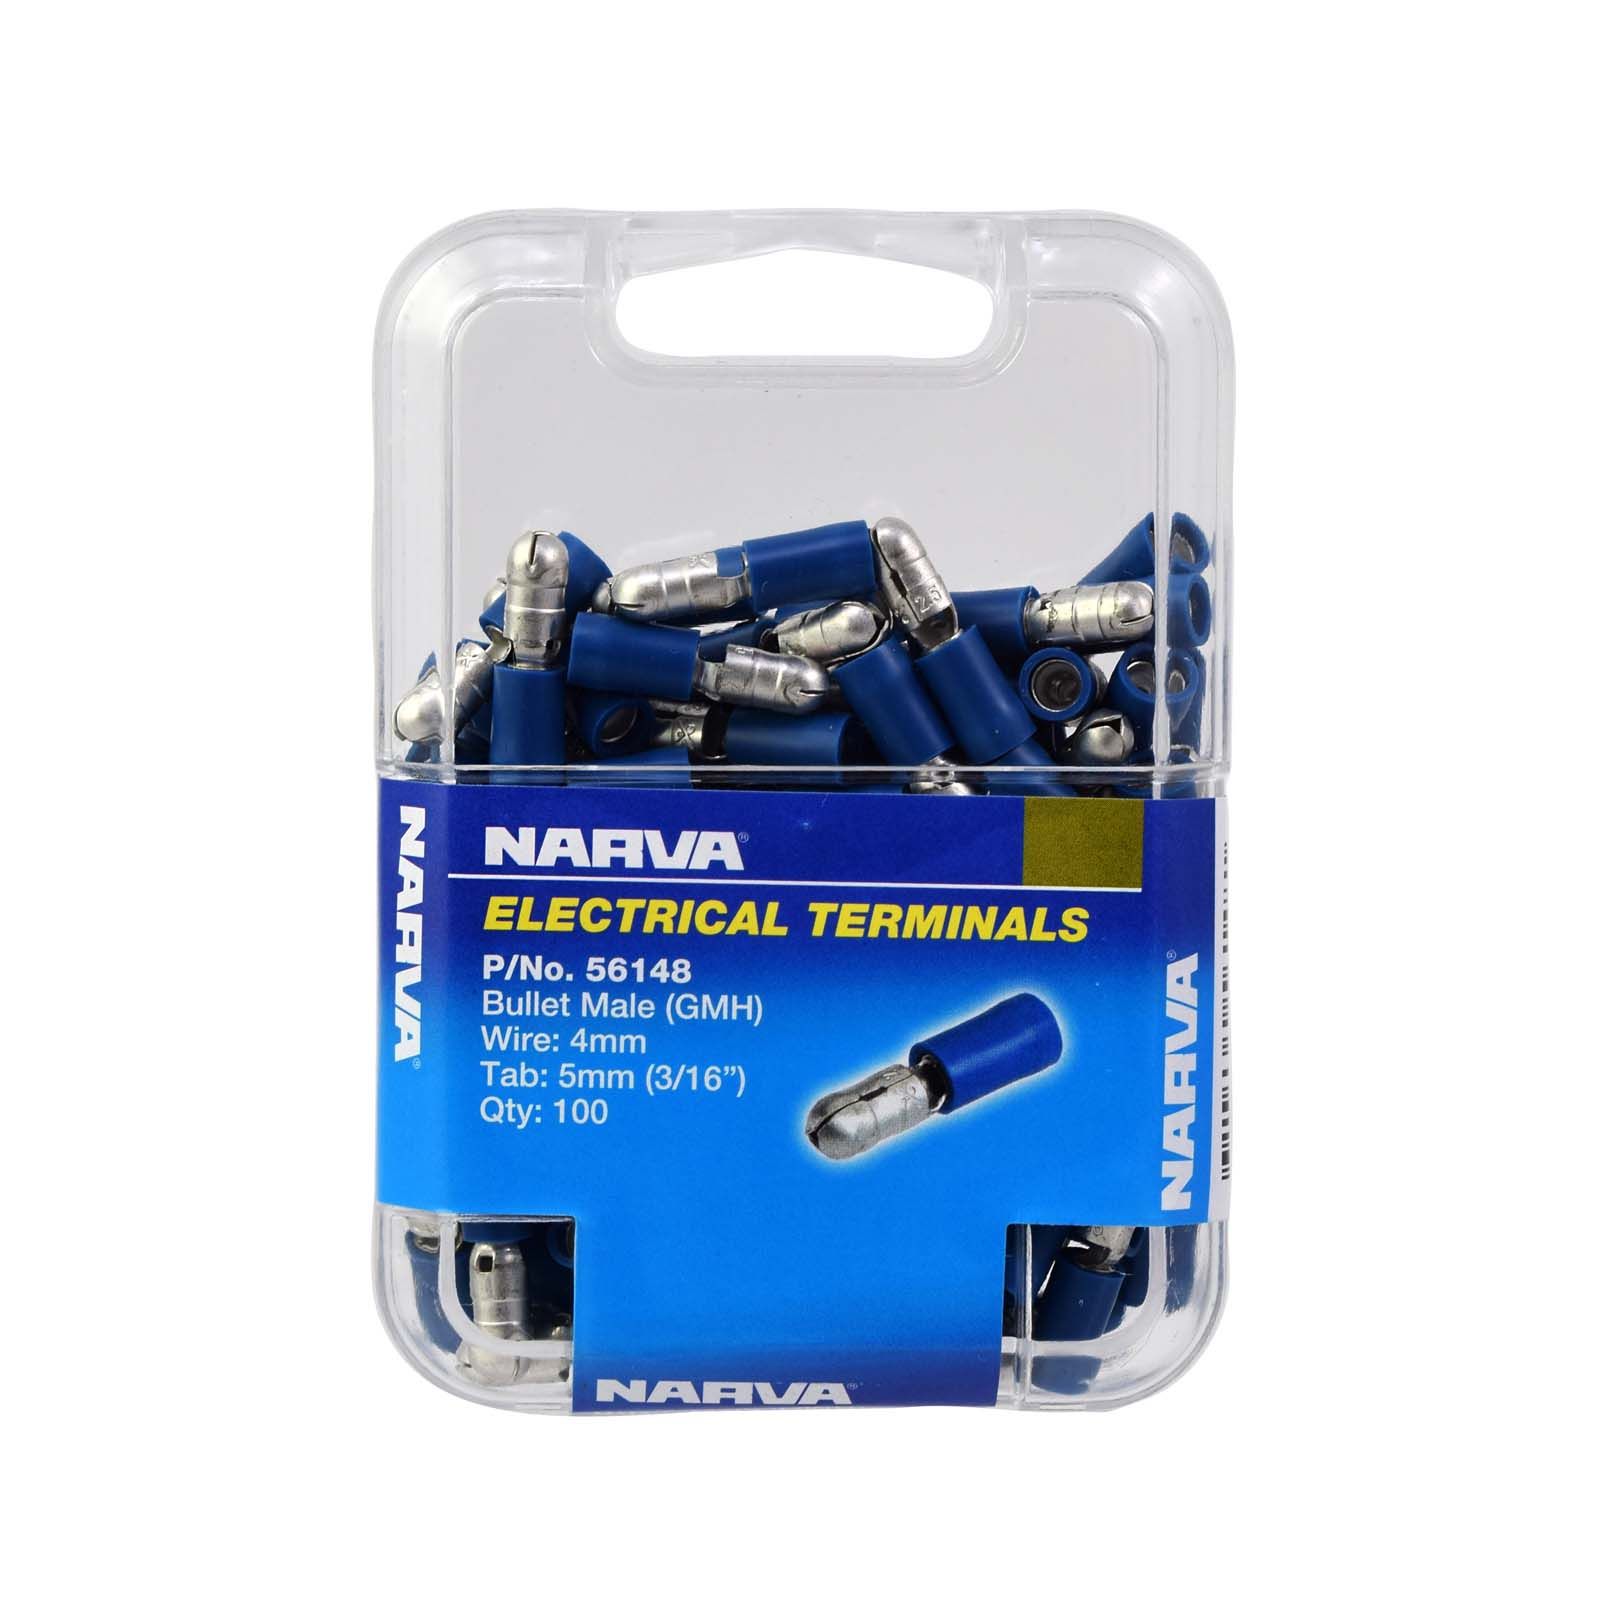 Narva  PROFESSIONAL TERMINAL AND CONNECTOR ASSORTMENT